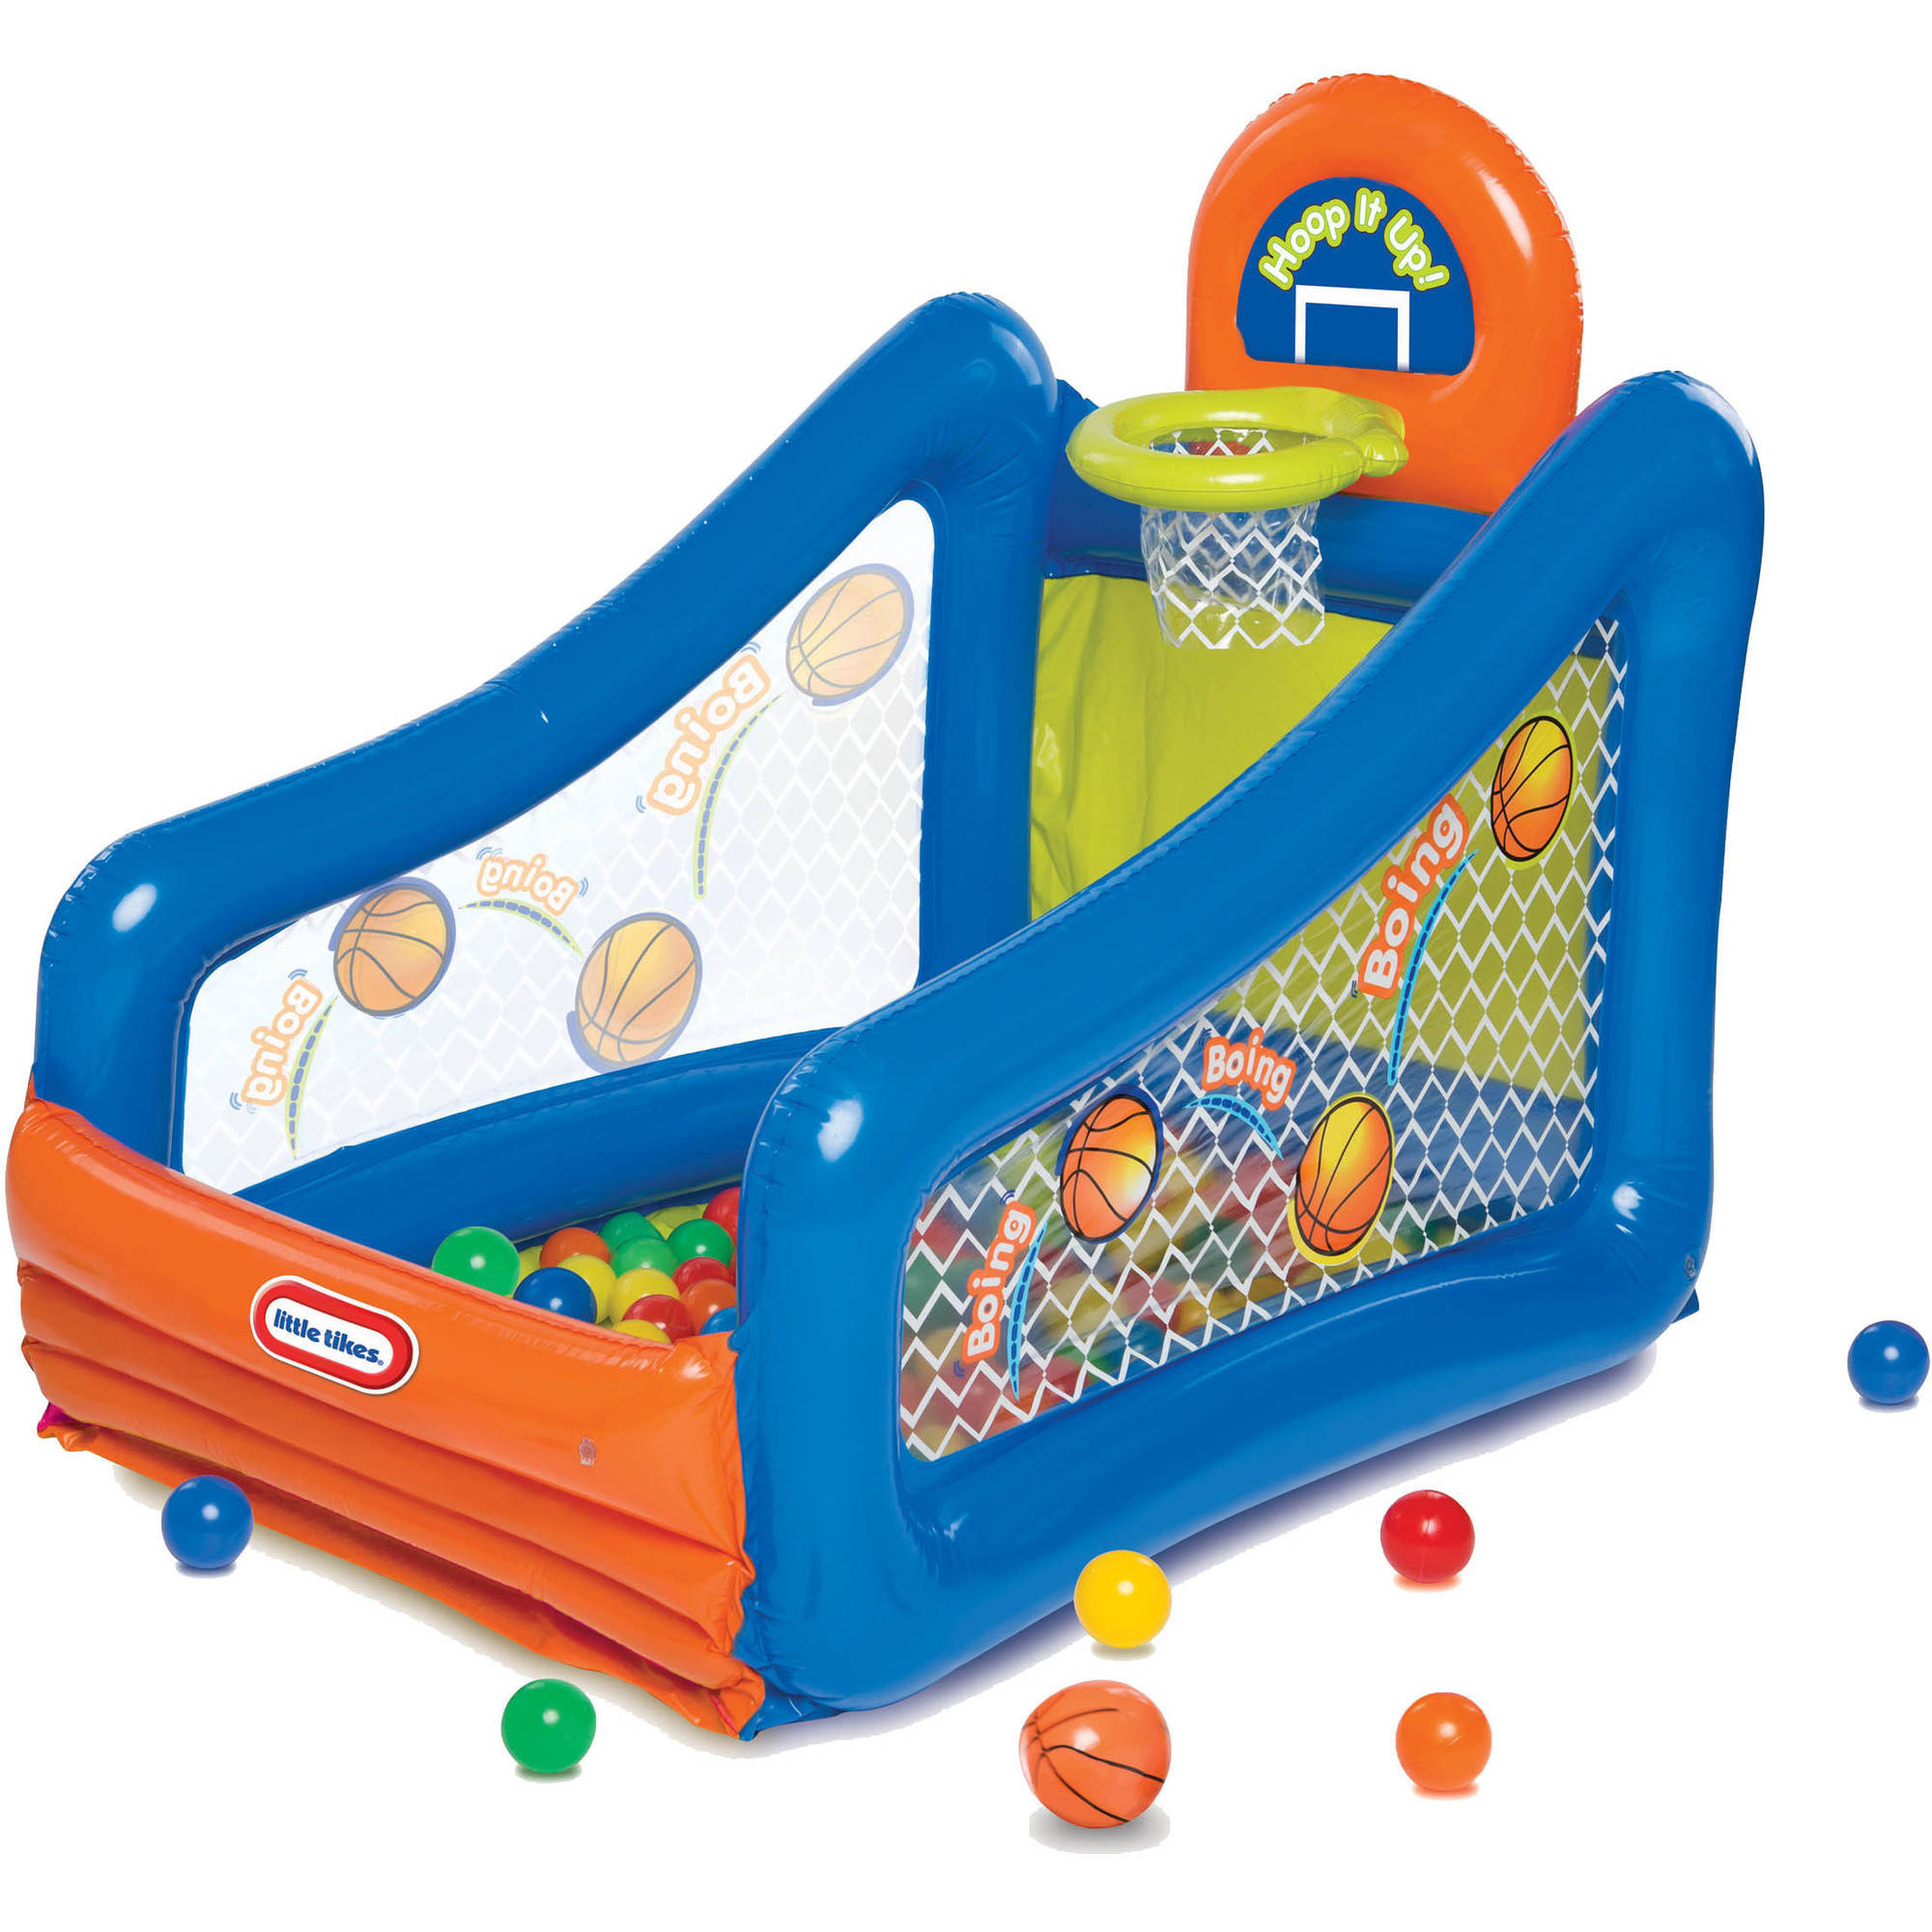 Little Tikes Hoop It Up! Play Center Ball Pit, Kids Ages 3 and up - image 2 of 3